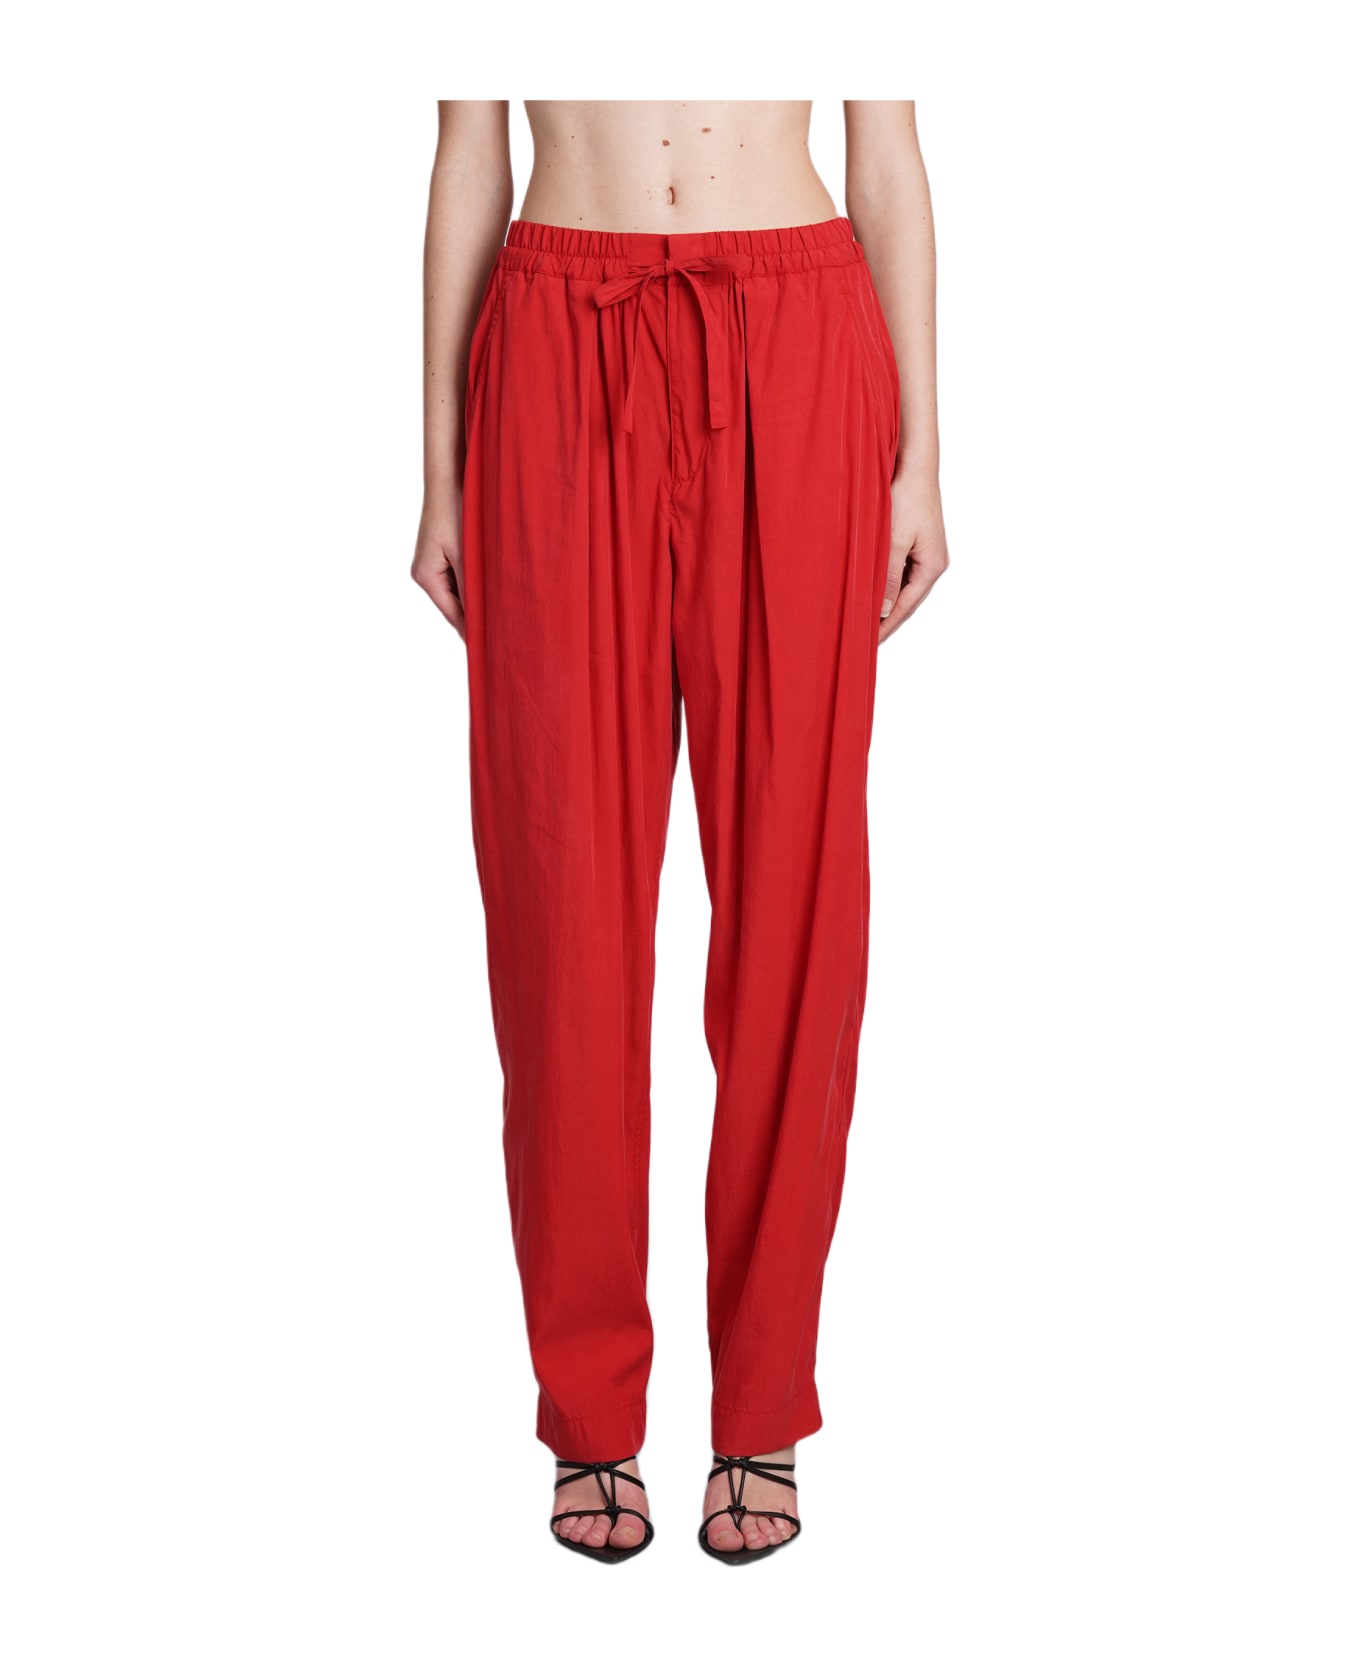 Isabel Marant Hectorina Pants In Red Wool And Polyester - red